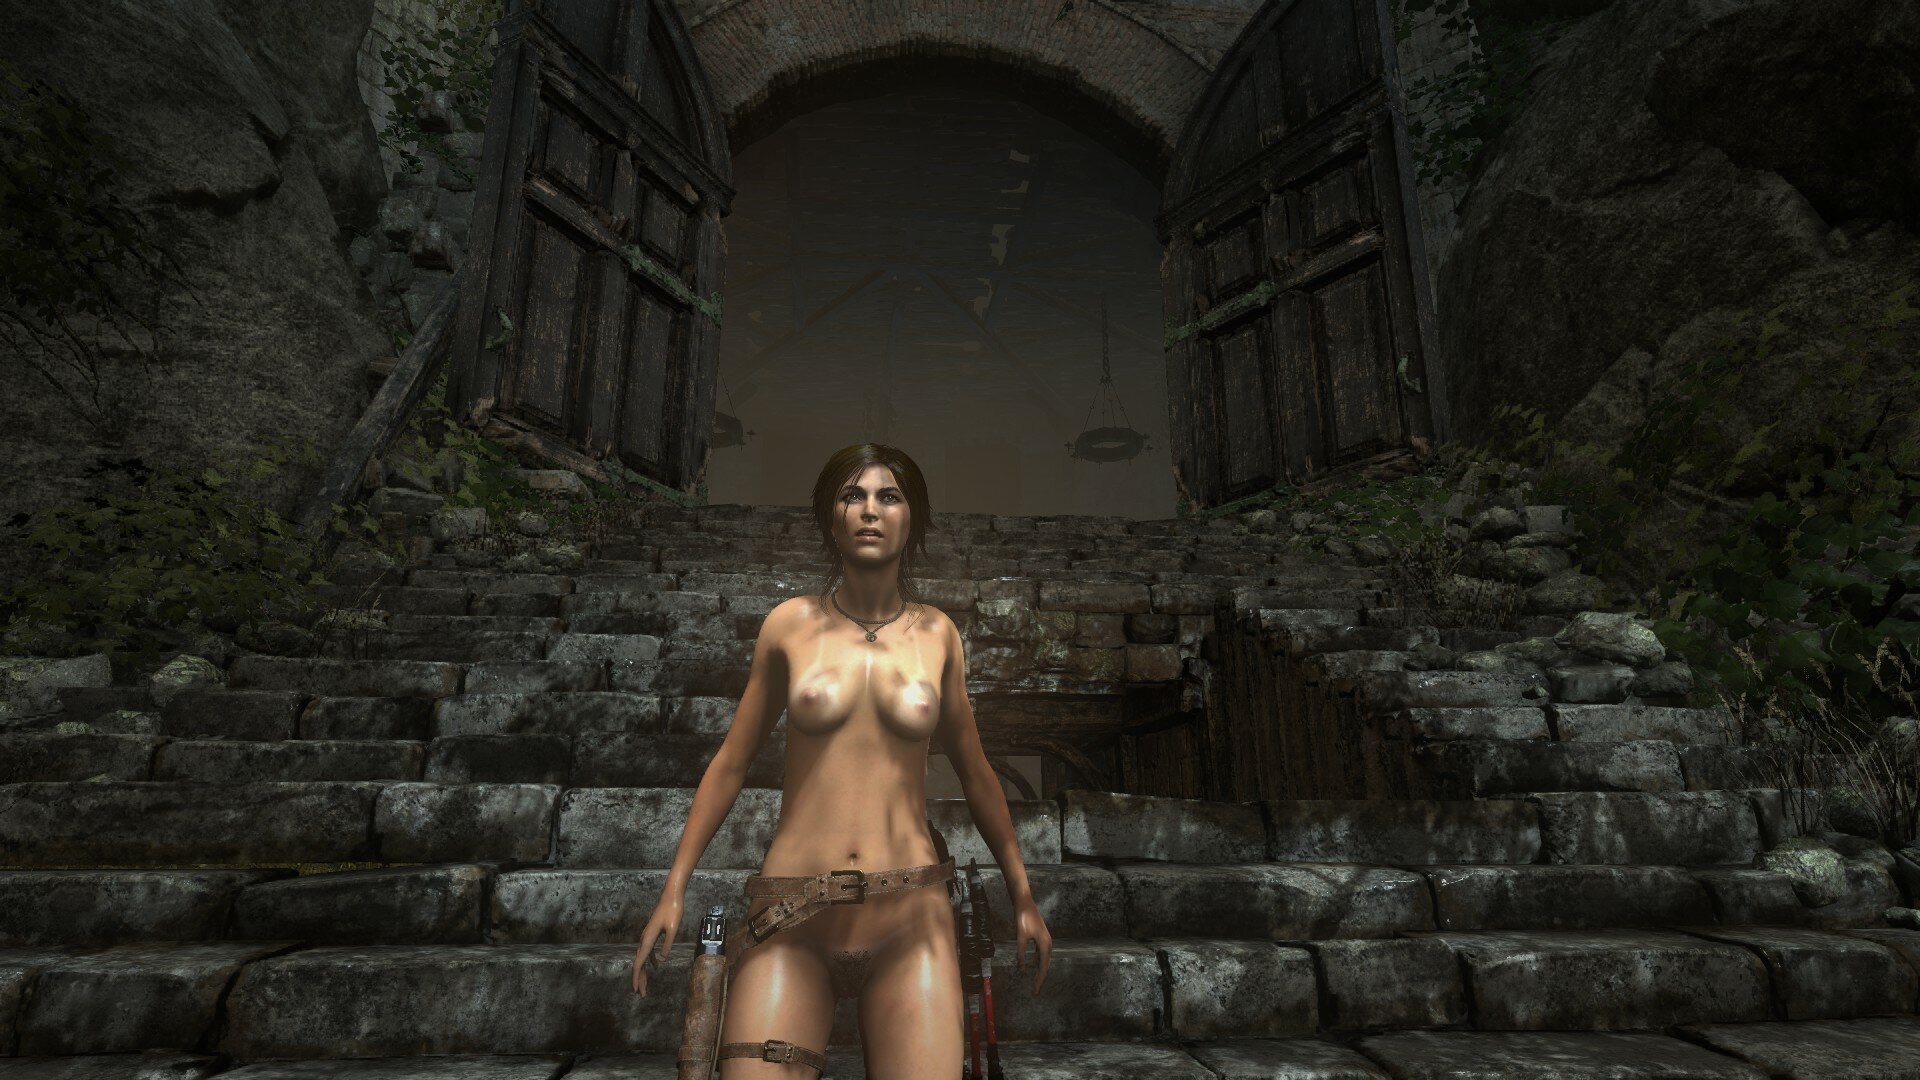 Rise of the Tomb Raider Nude Mod? | Page 2 | Undertow Club